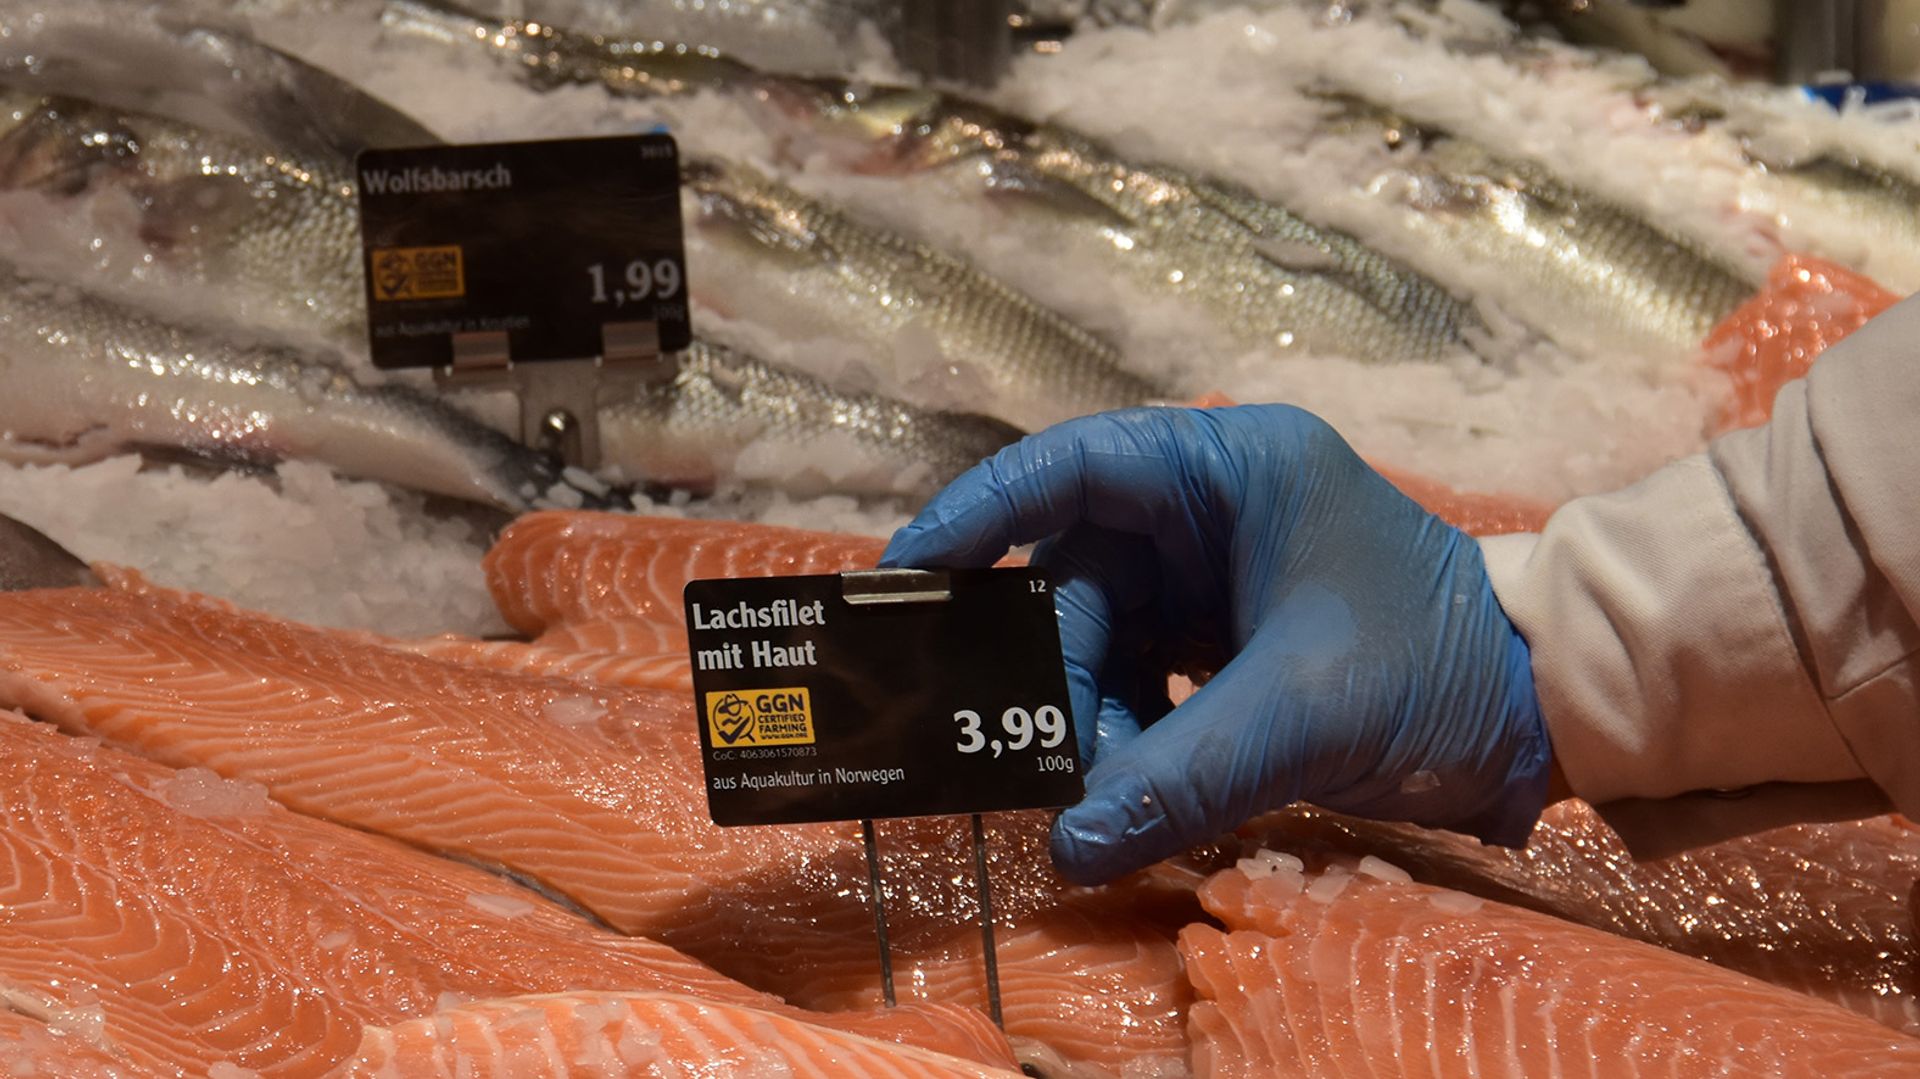 Image of salmon with the GGN label at a retailer‘s fresh fish counter